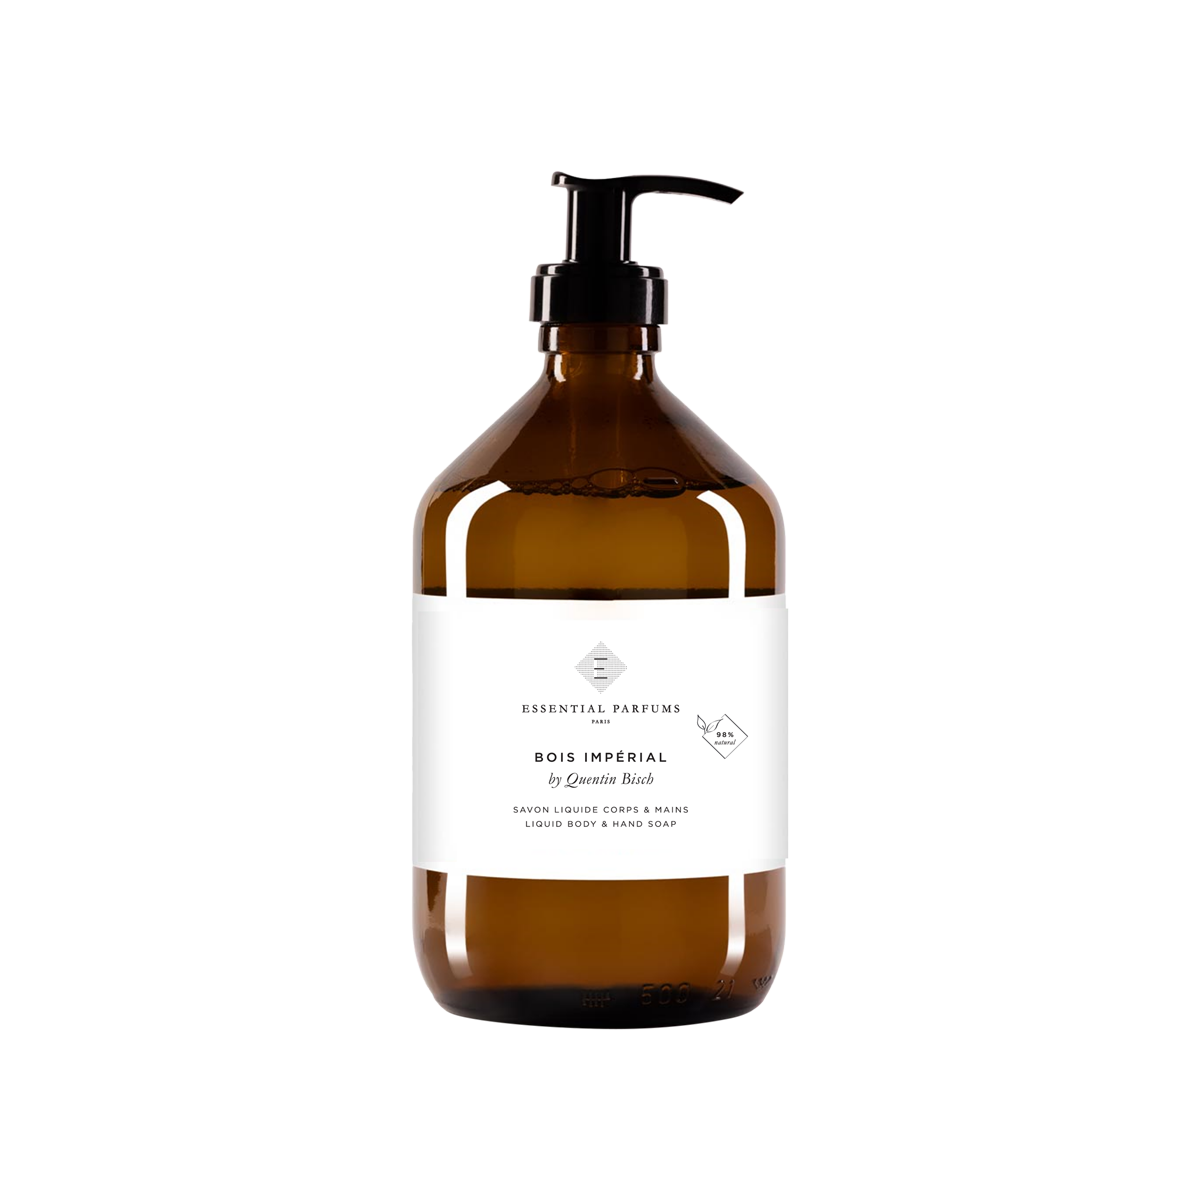 Essential Parfums - Bois Imperial Hand and Body Soap